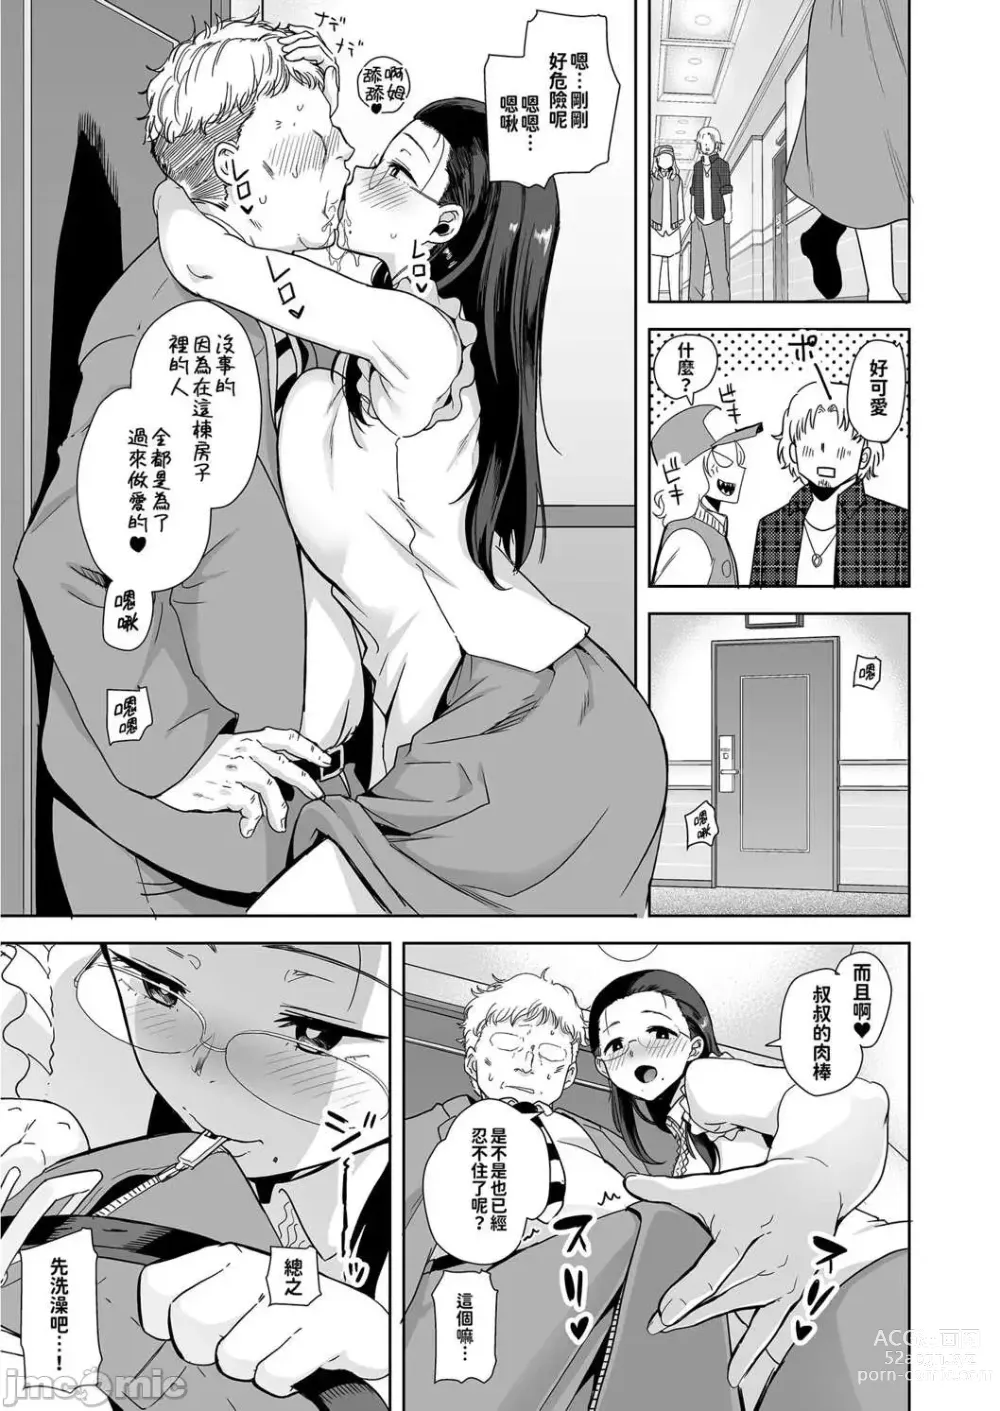 Page 6 of doujinshi Seika Girls Academys Officially Approved Prostitute Man 1 + 2 + 3